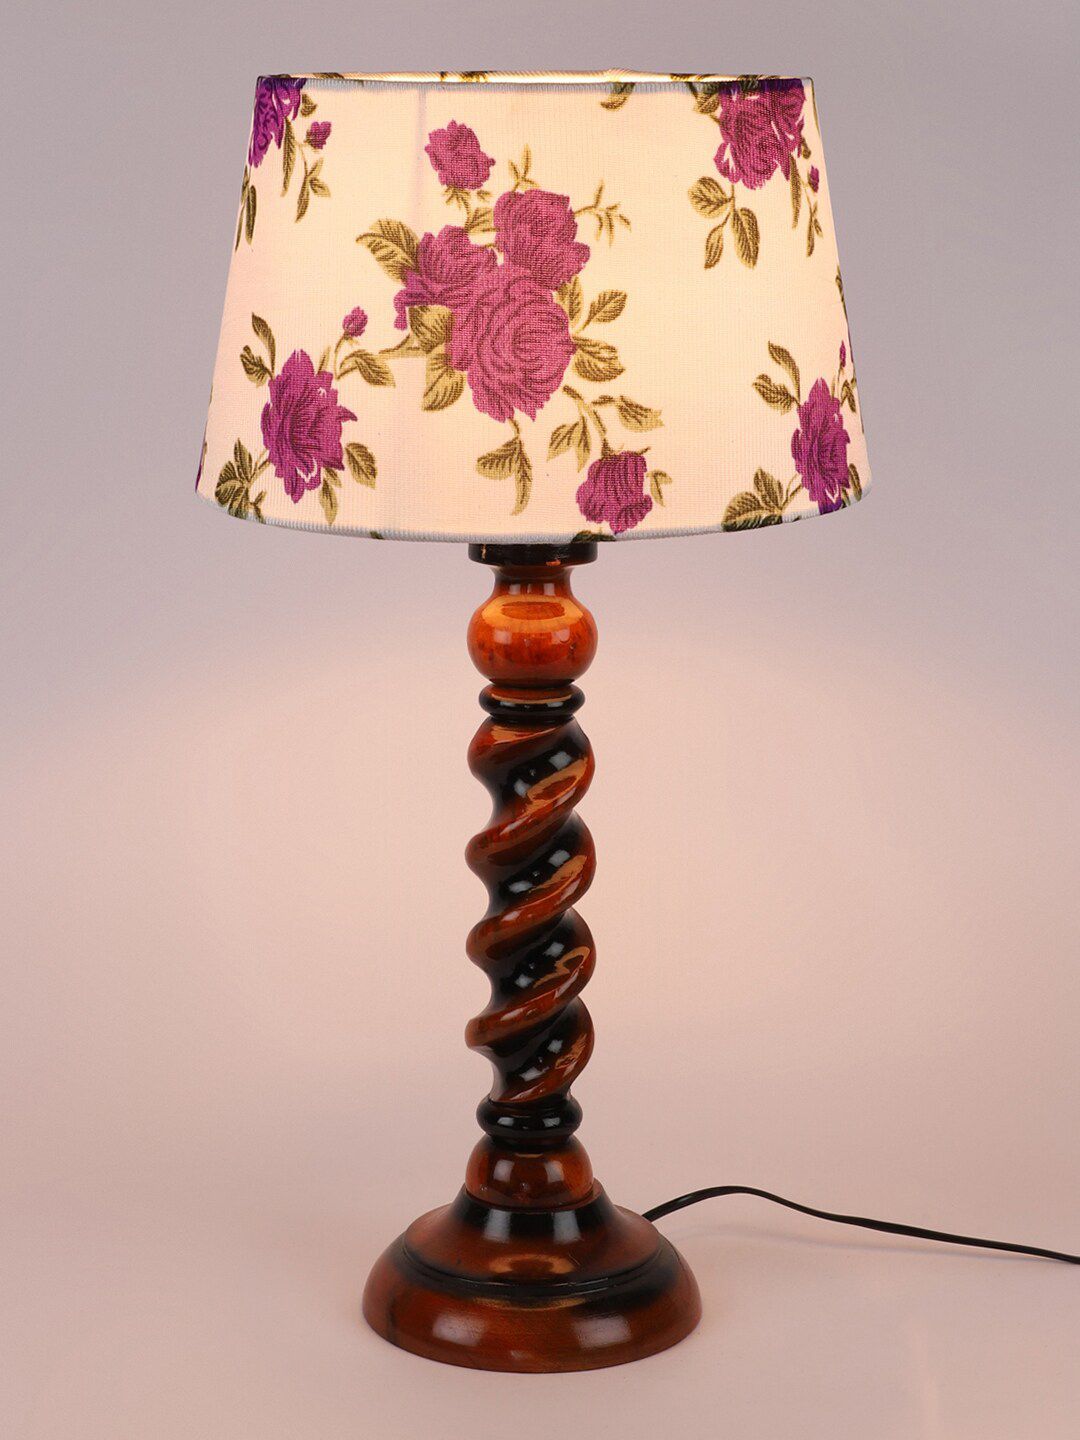 foziq Brown & White Printed Country Table Lamp Price in India